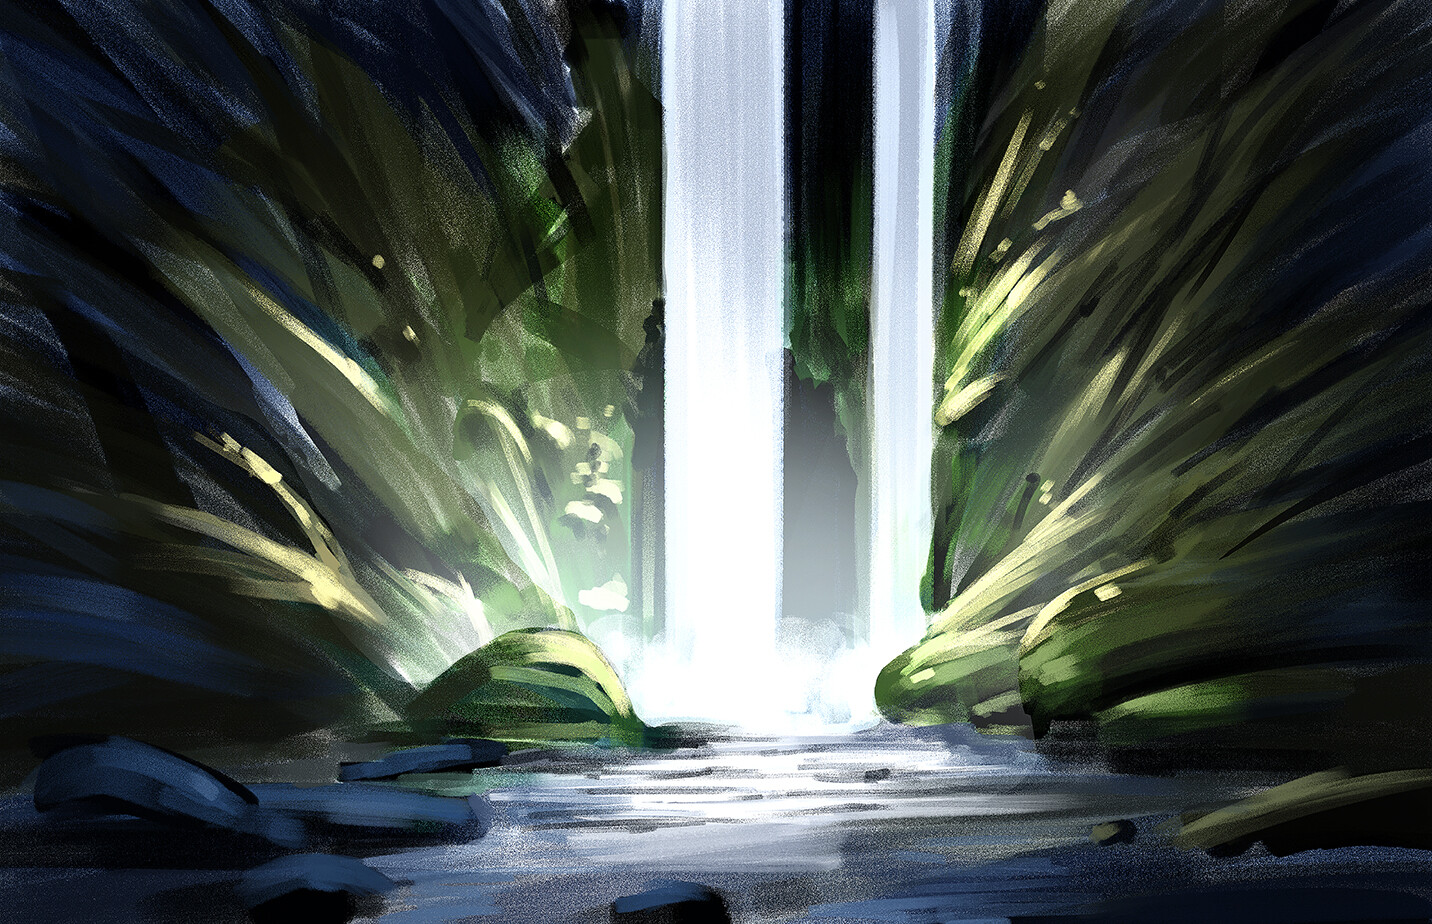 the 30 minute speed paint